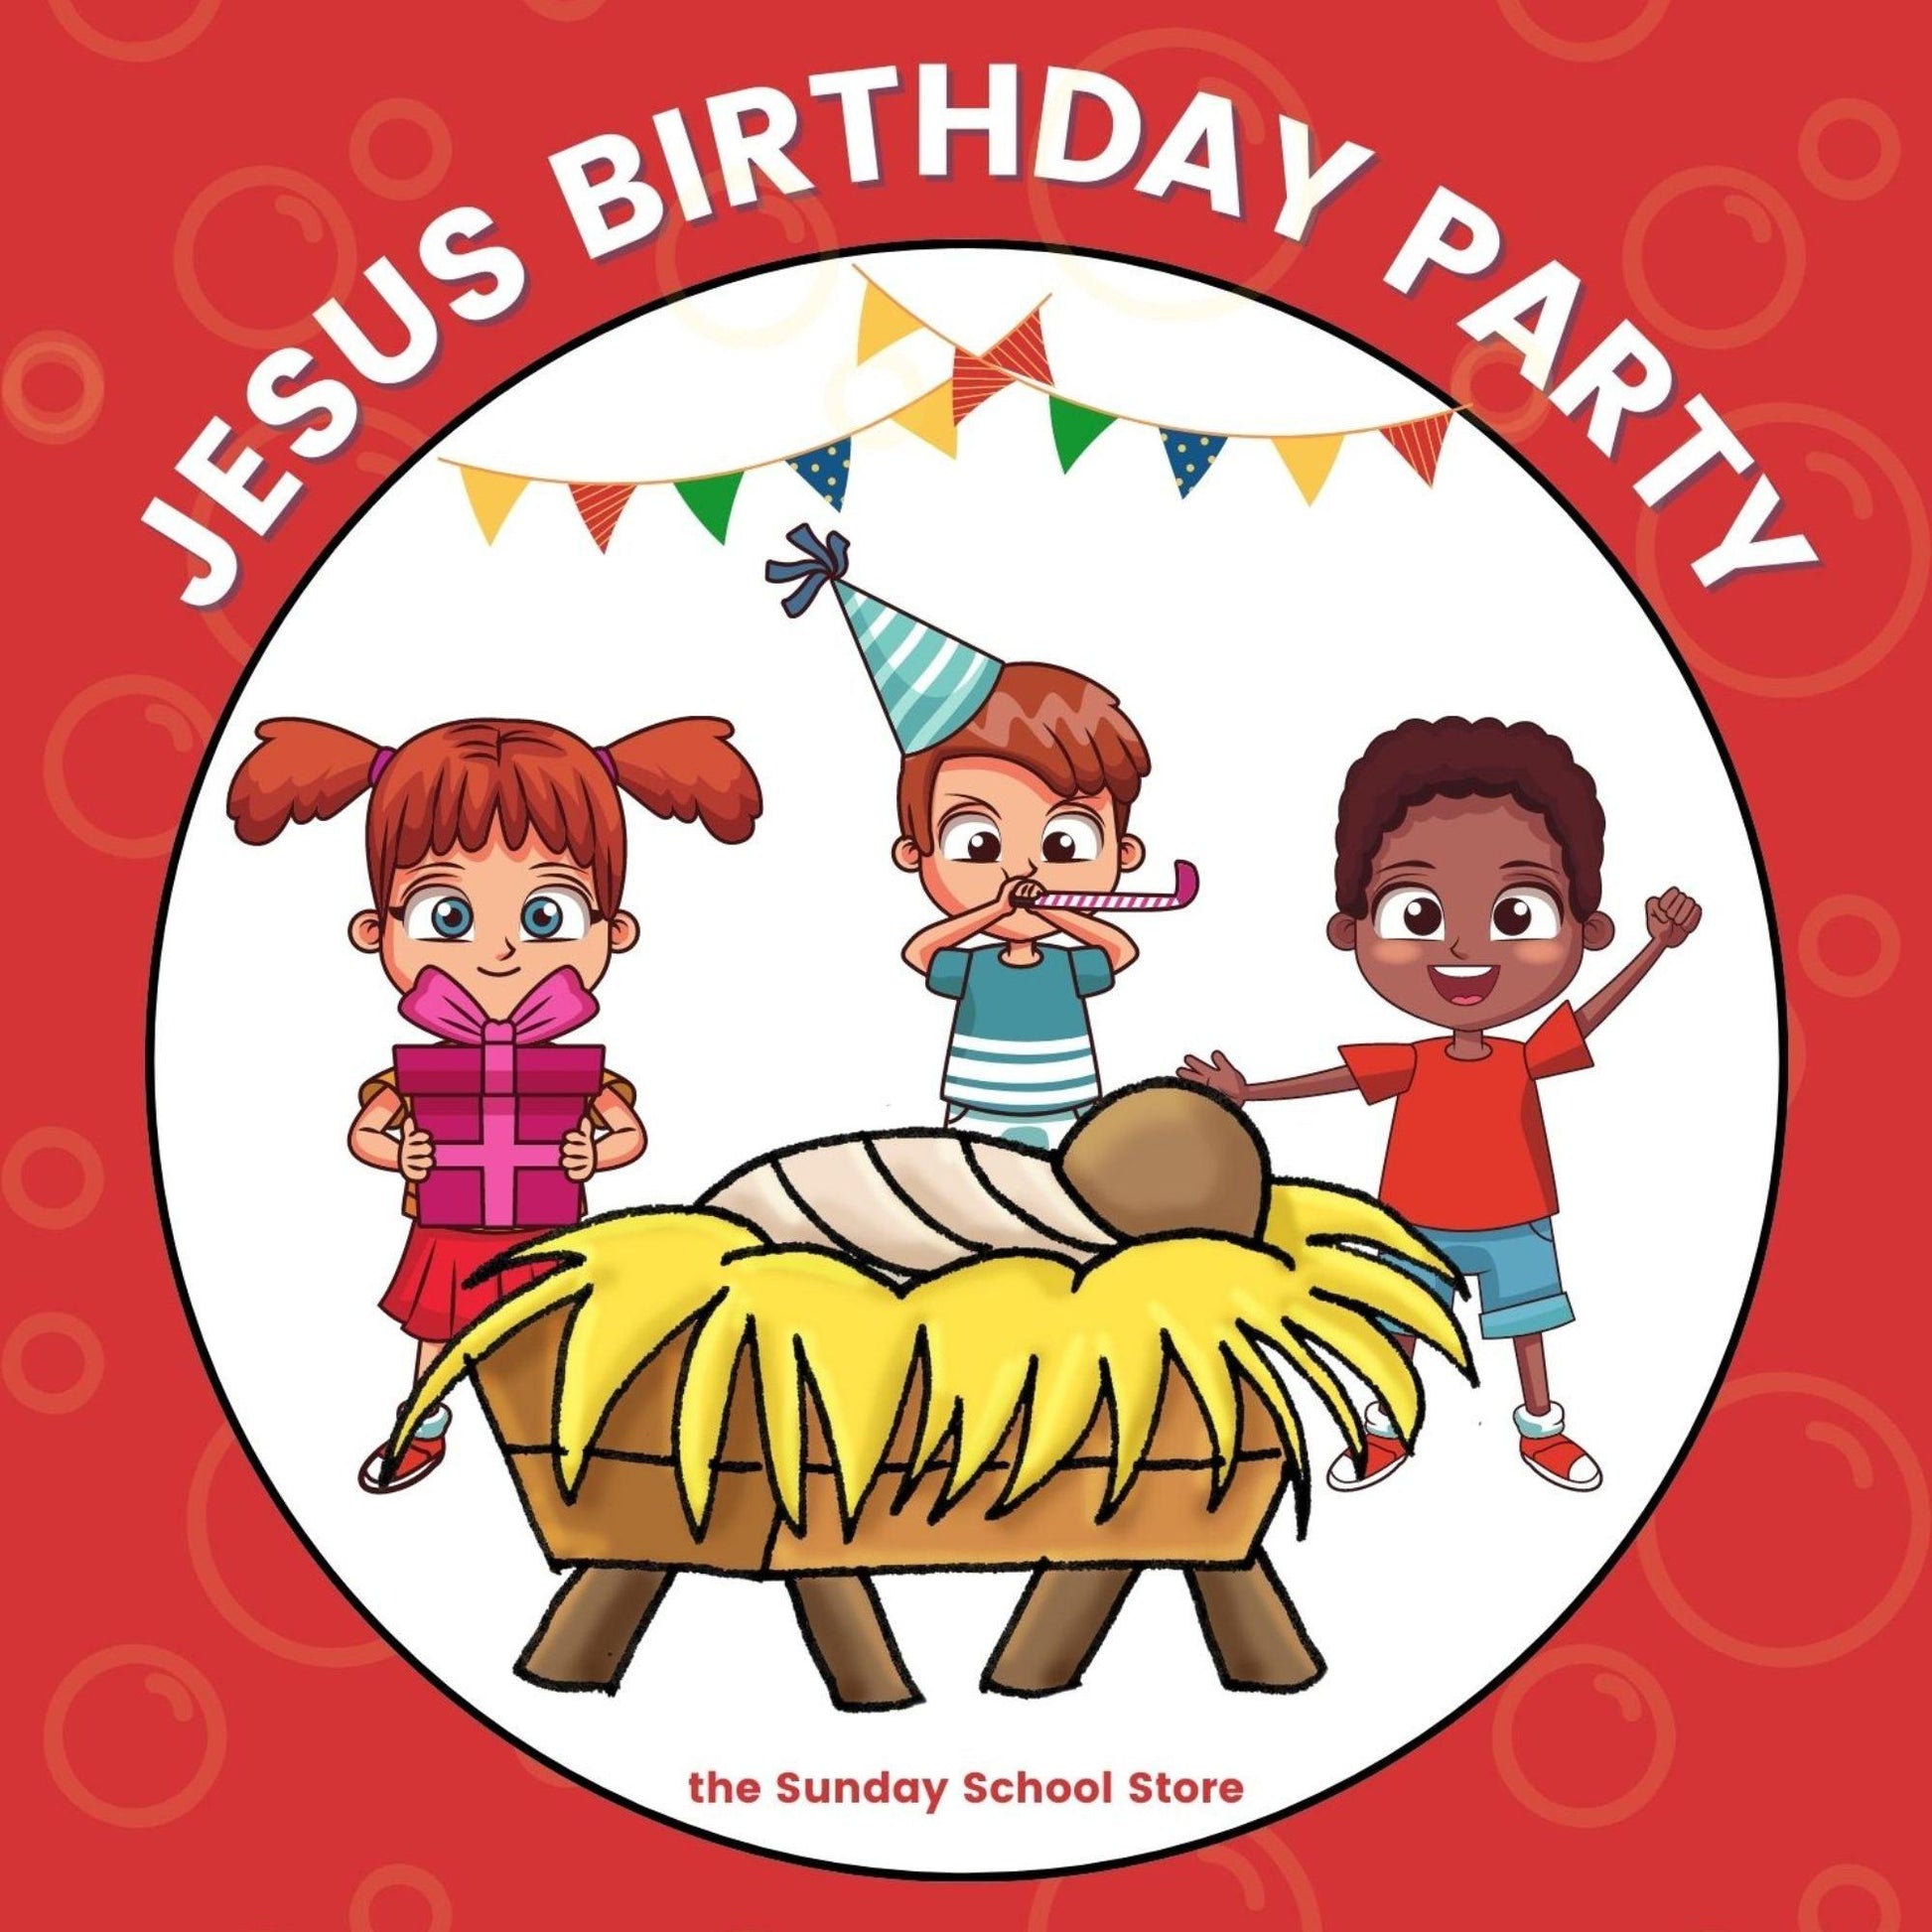 Jesus Birthday Party - Christmas Event for Church or Home - Sunday School Store 